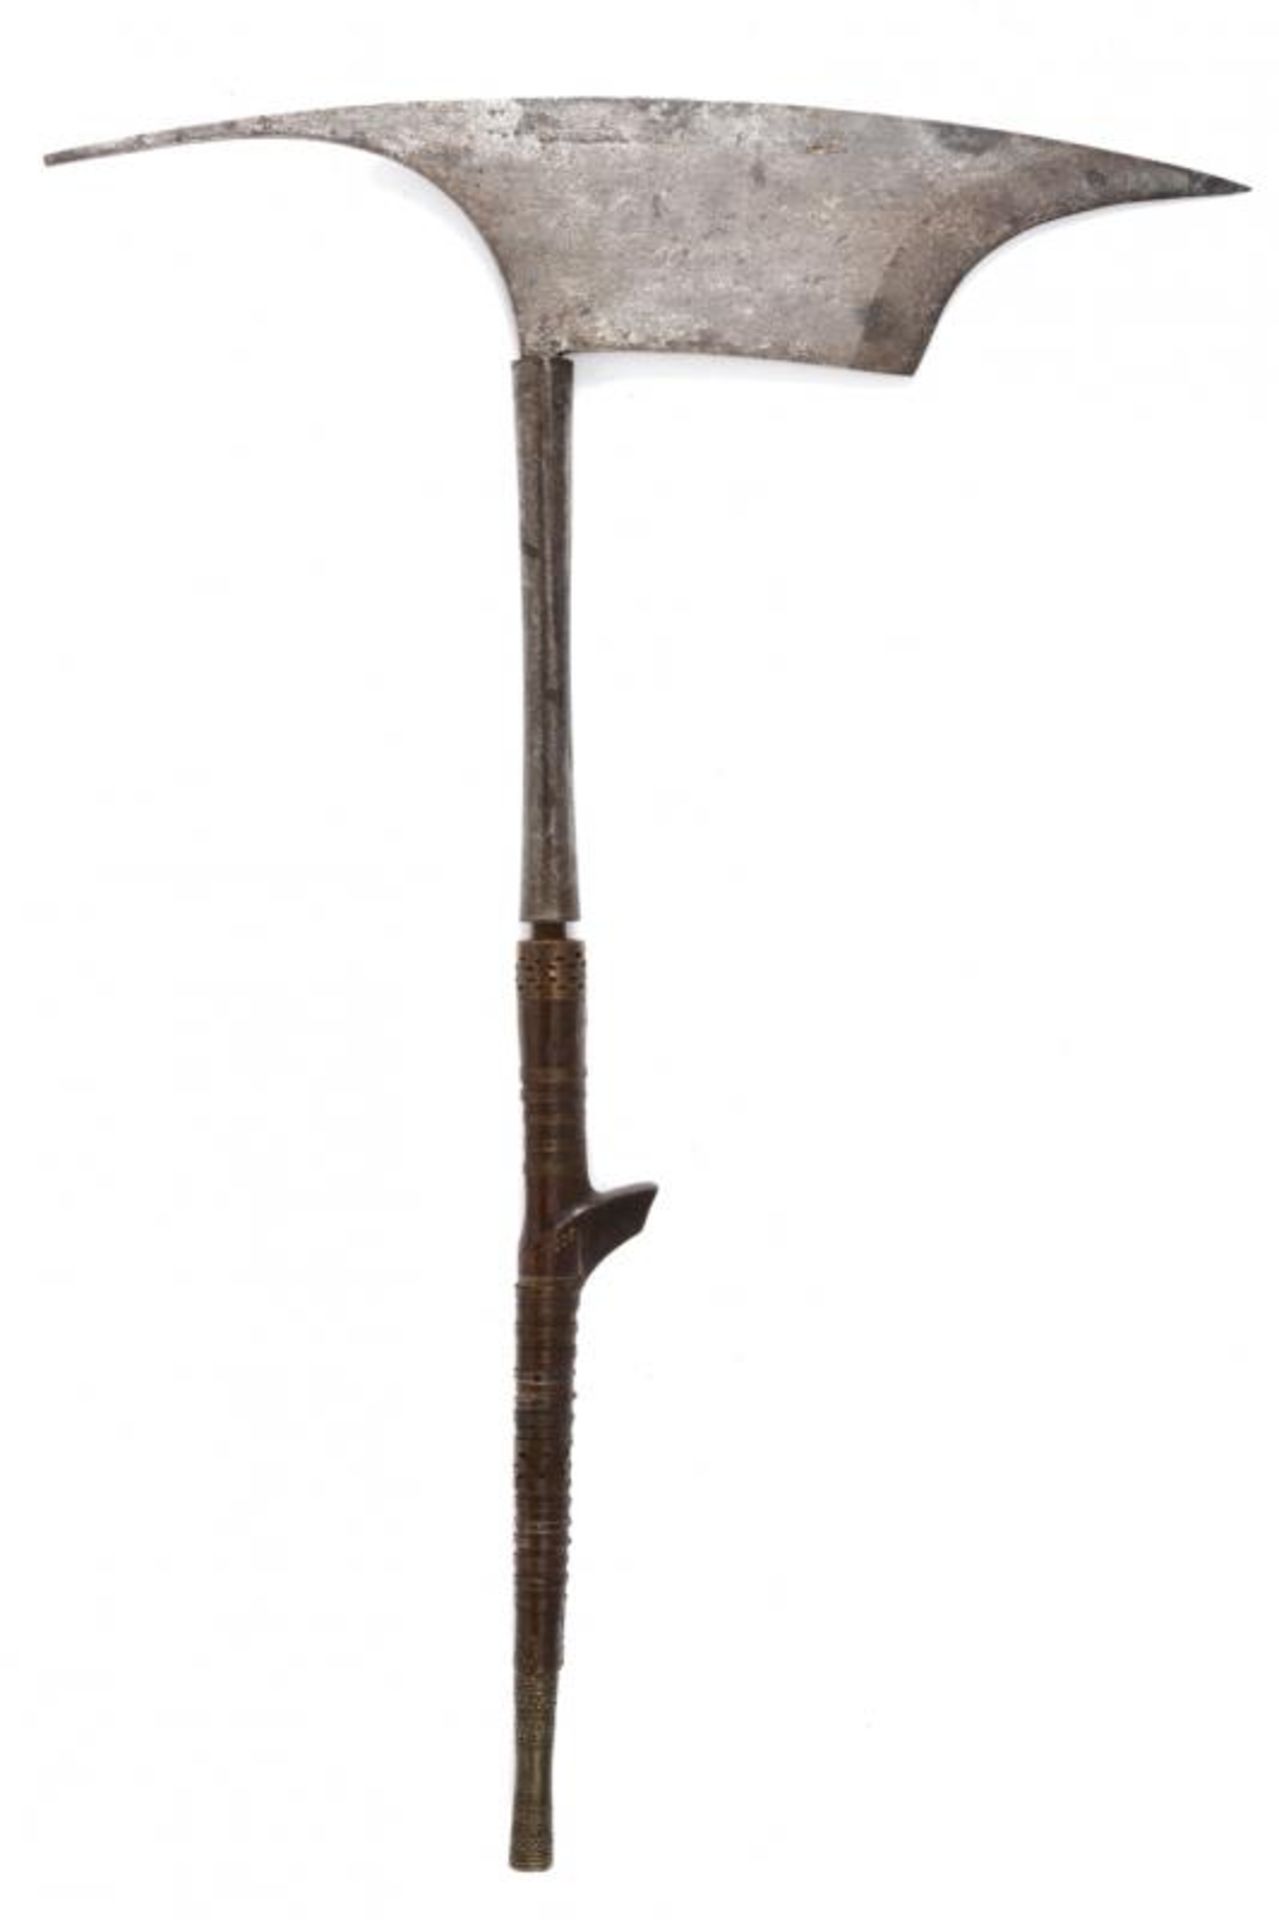 An axe (sinawit) of the Igorot tribe